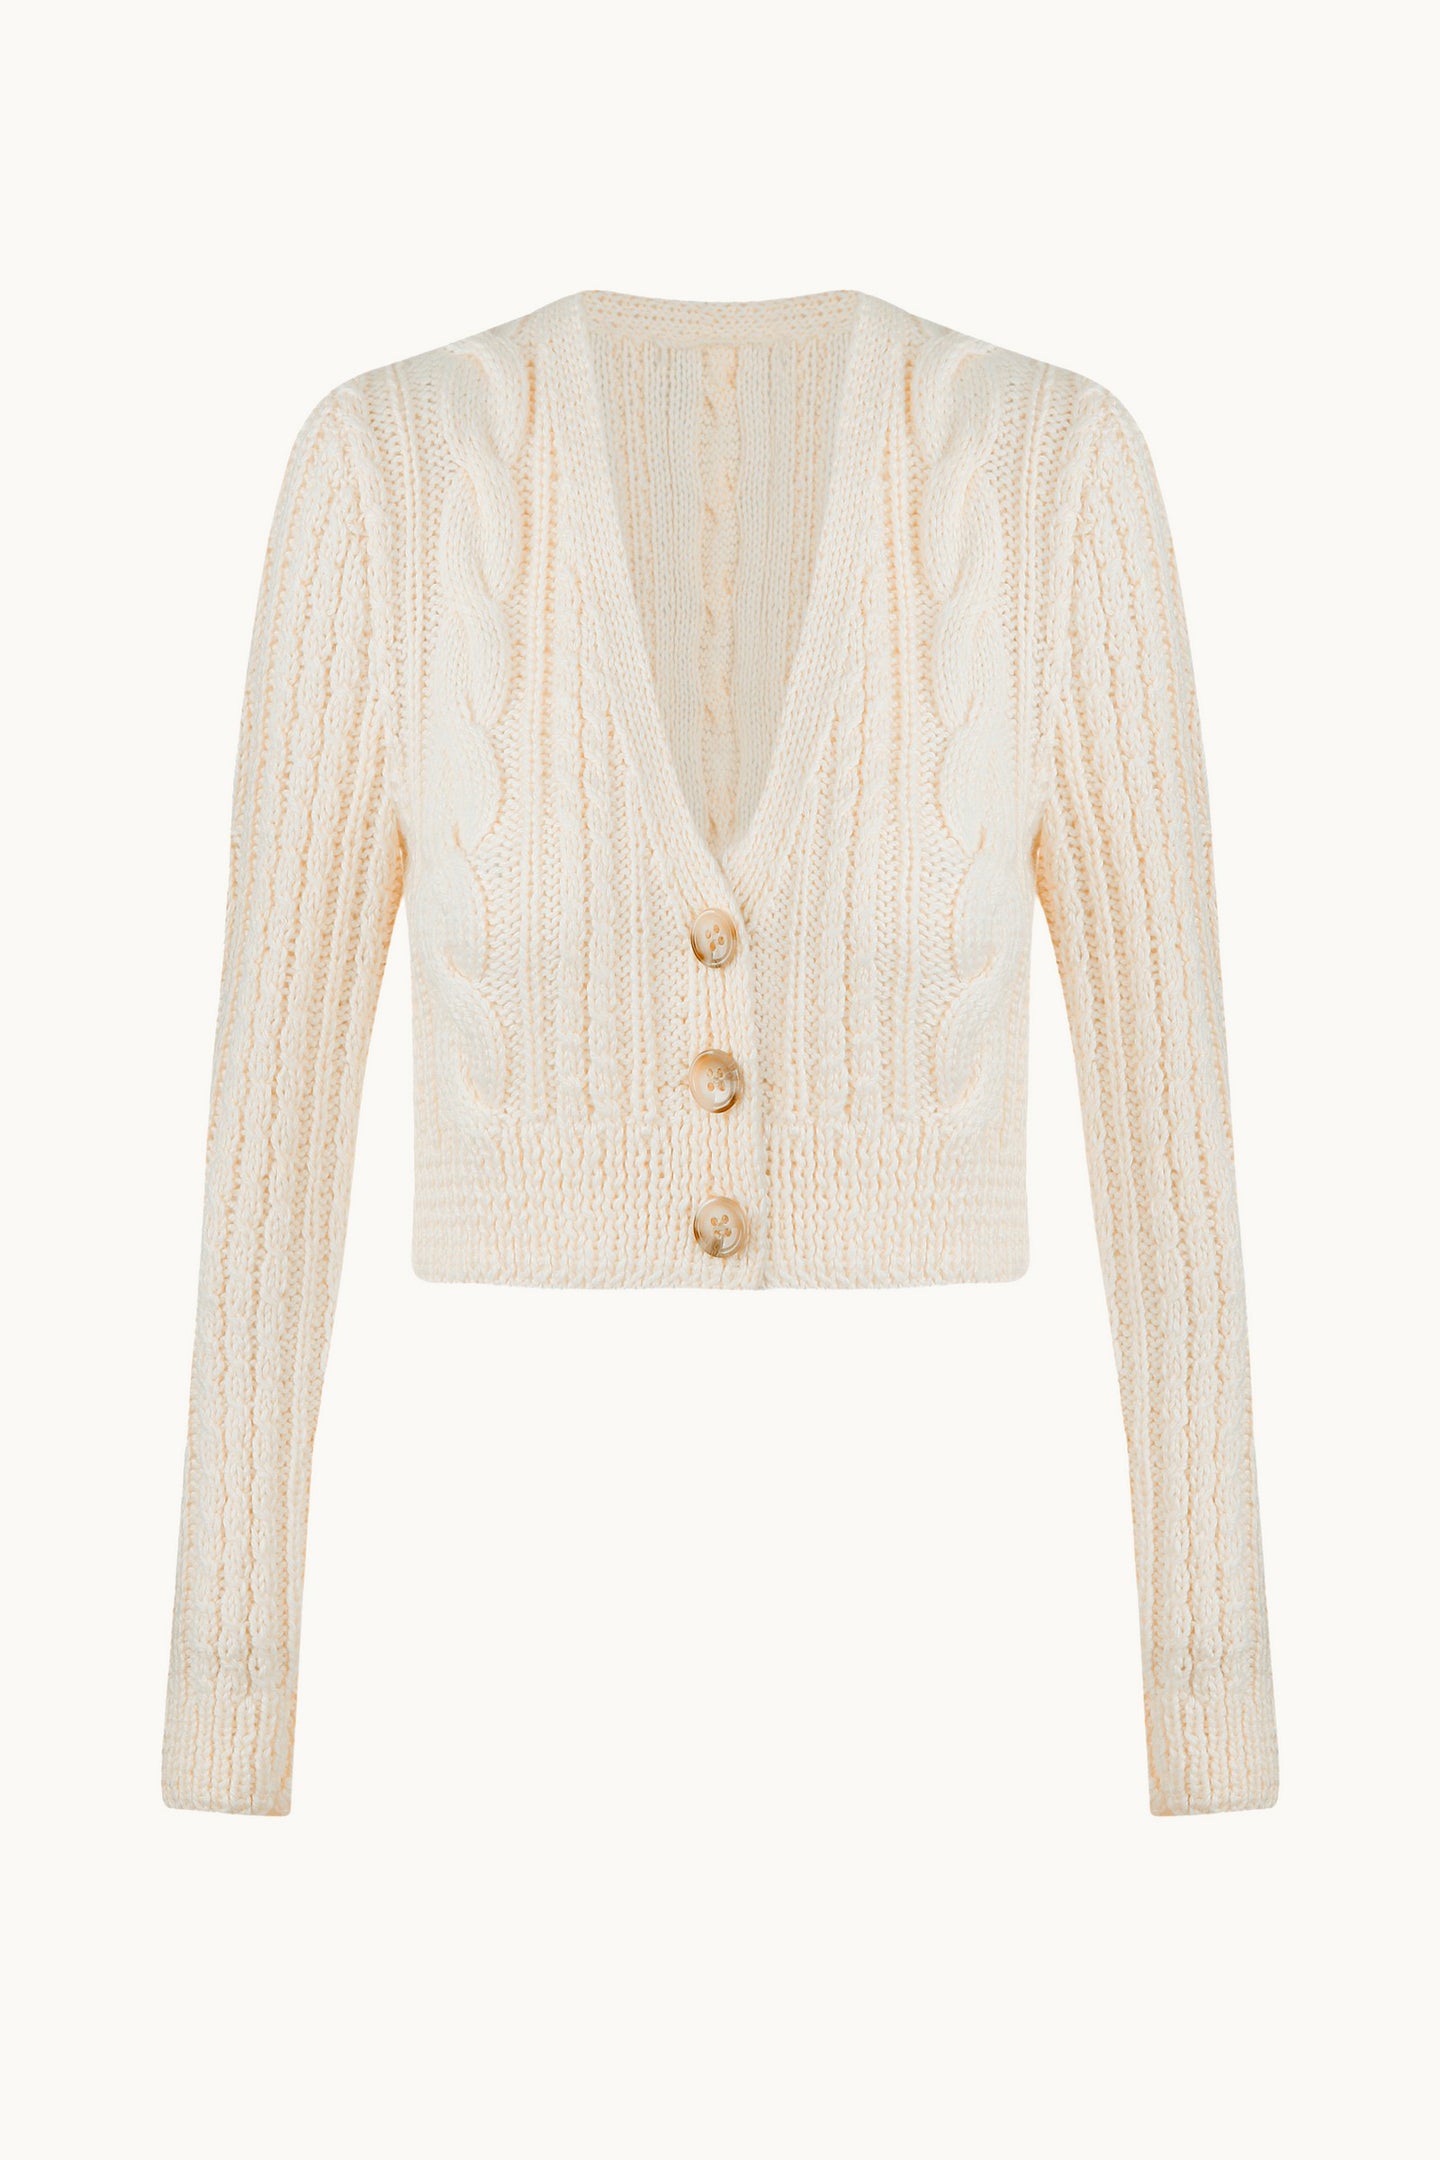 Dubilet white cardigan front view